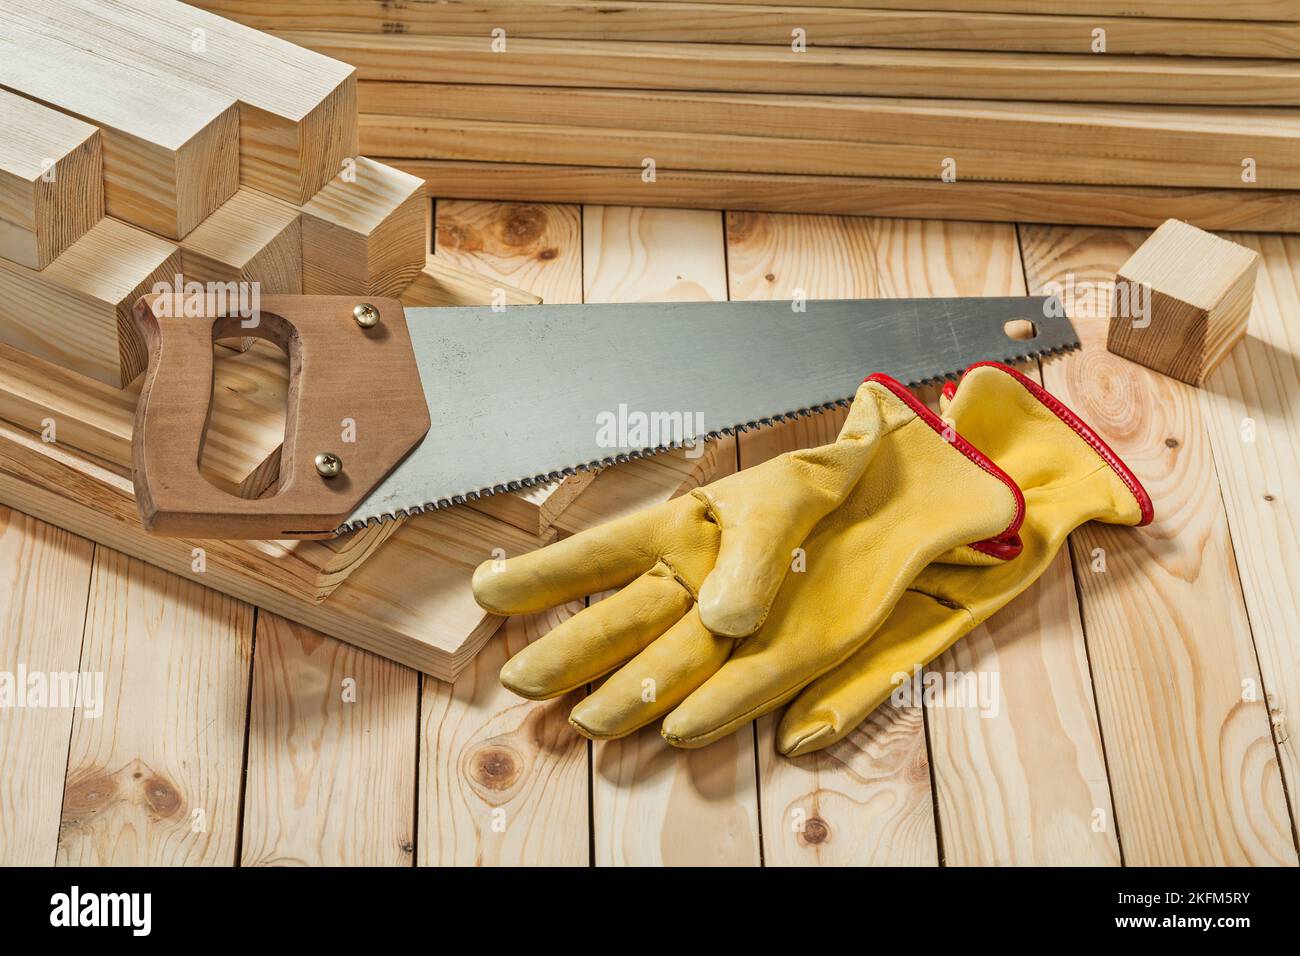 handsaw and yellow working gloves on wooden timber materials Stock Photo